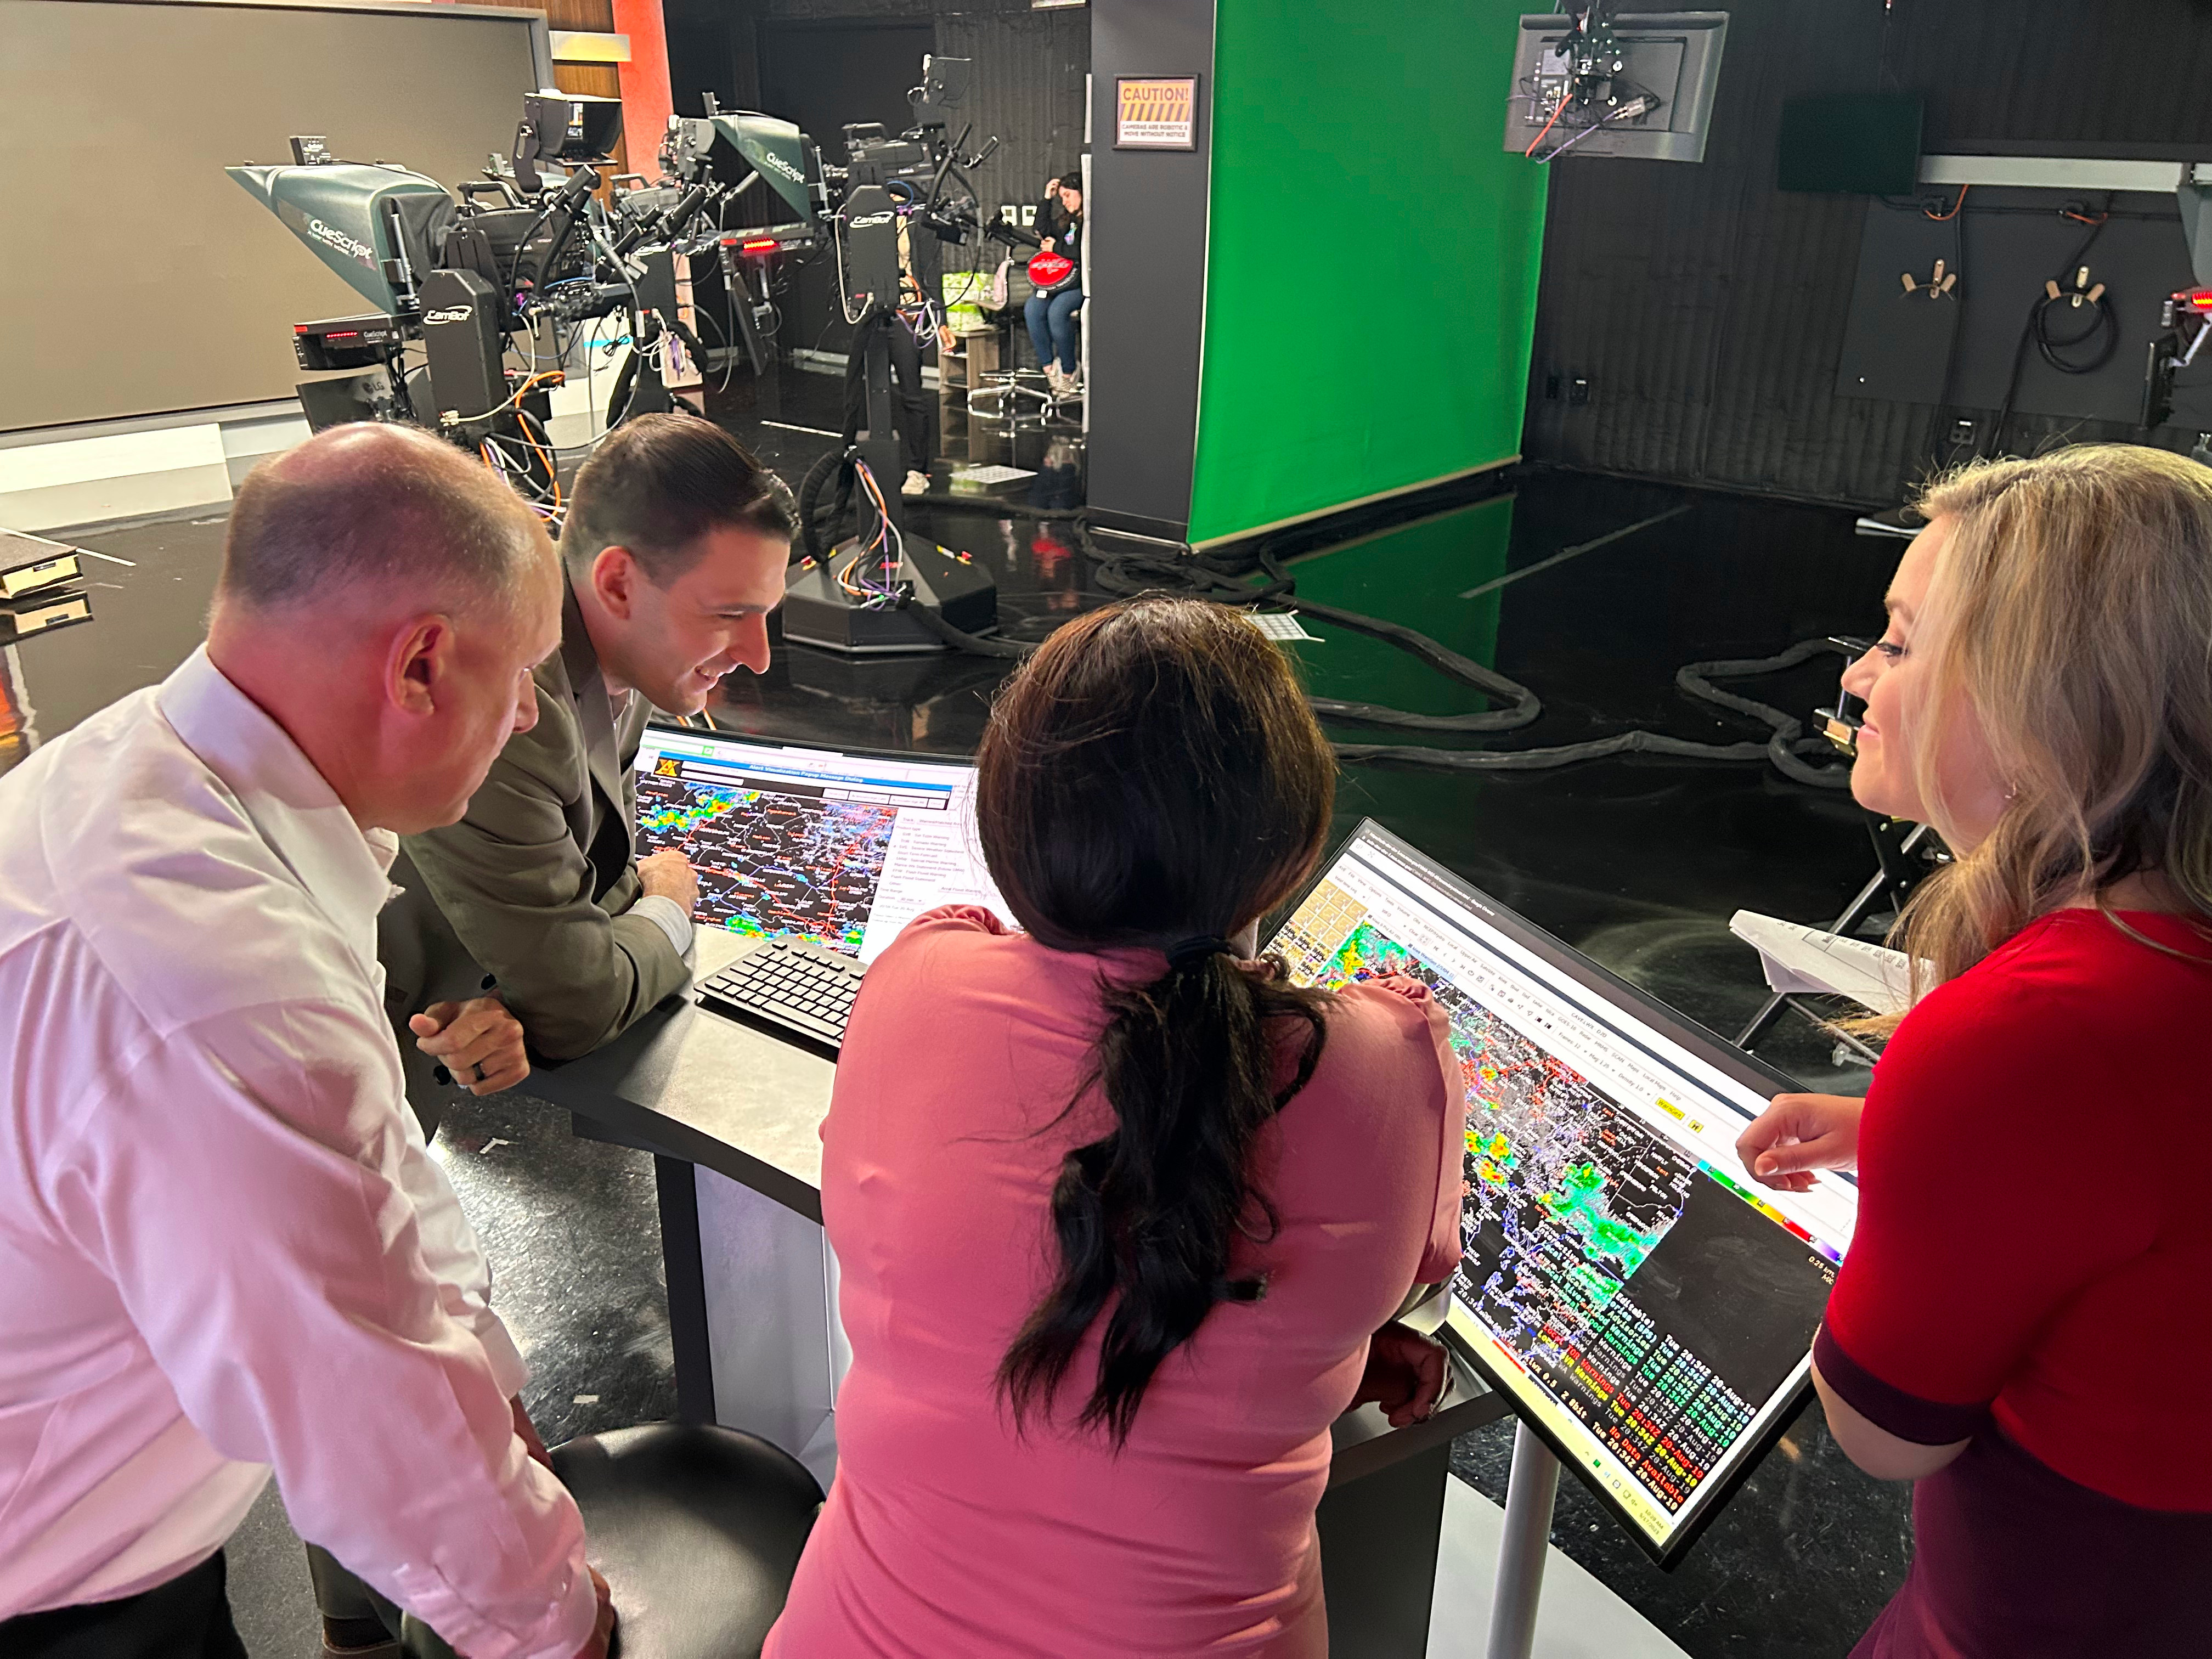 DC News Now Meteorologists Jackie Layer, Brittany Ward and Scott Sumner look on while NWS Meteorologist Erik Taylor talks about the typical visual setup for warning operations and the products used in making a warning decision.